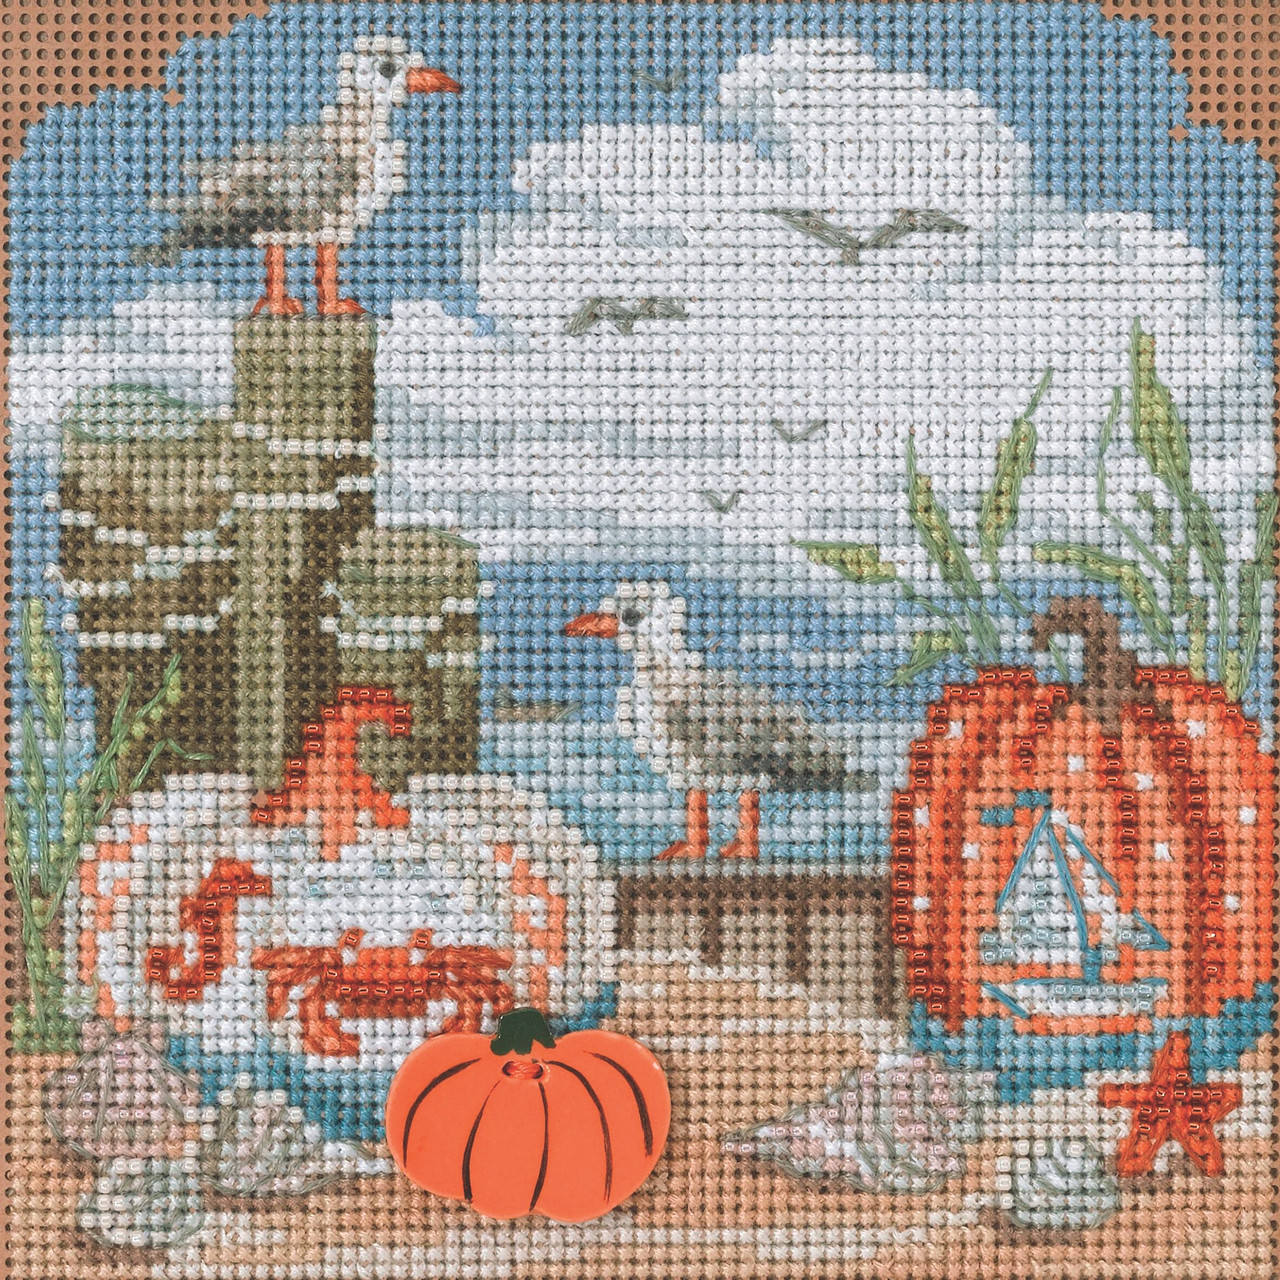 Stitched area of Fall Beach Cross Stitch Kit Mill Hill 2022 Buttons & Beads Autumn MH142225